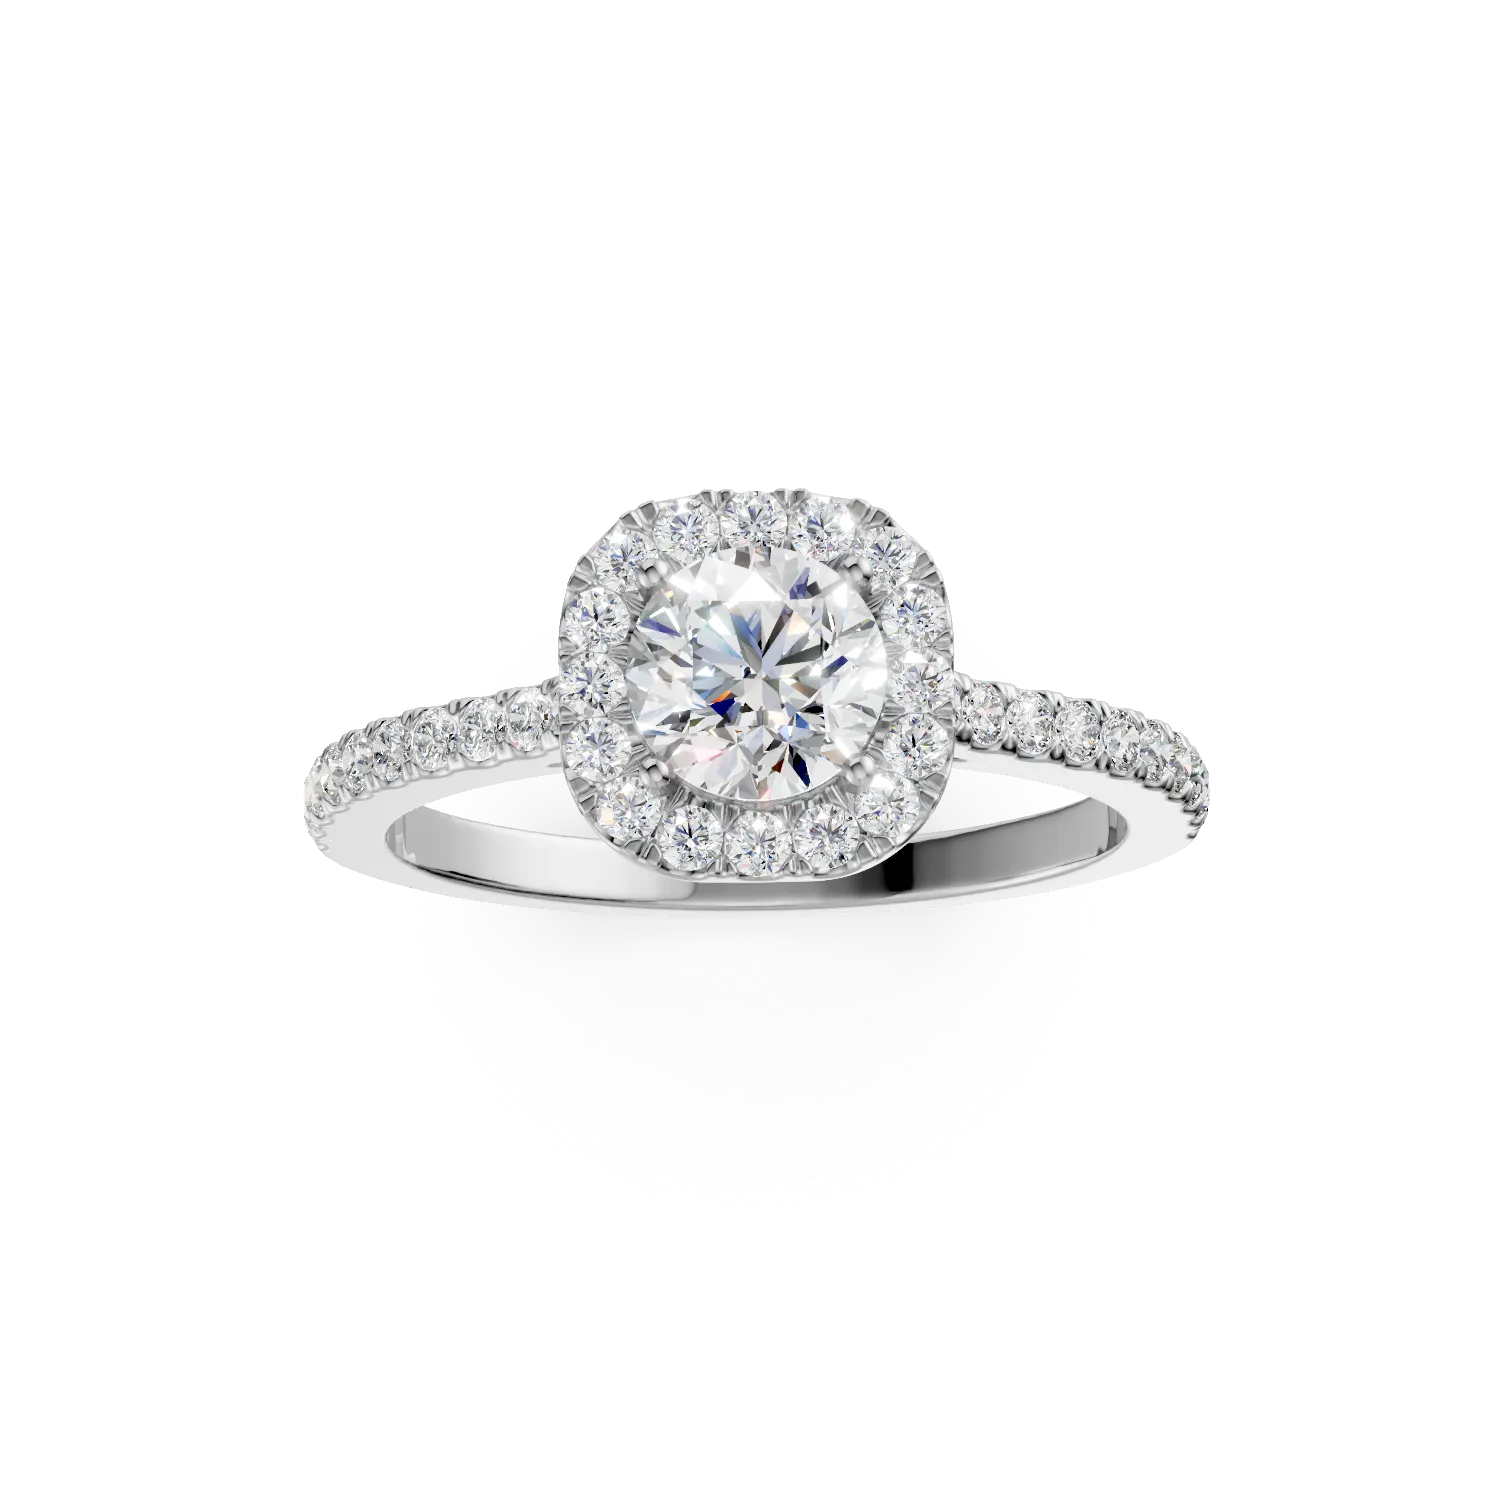 White gold Serenity ring with 0.86ct lab grown diamonds